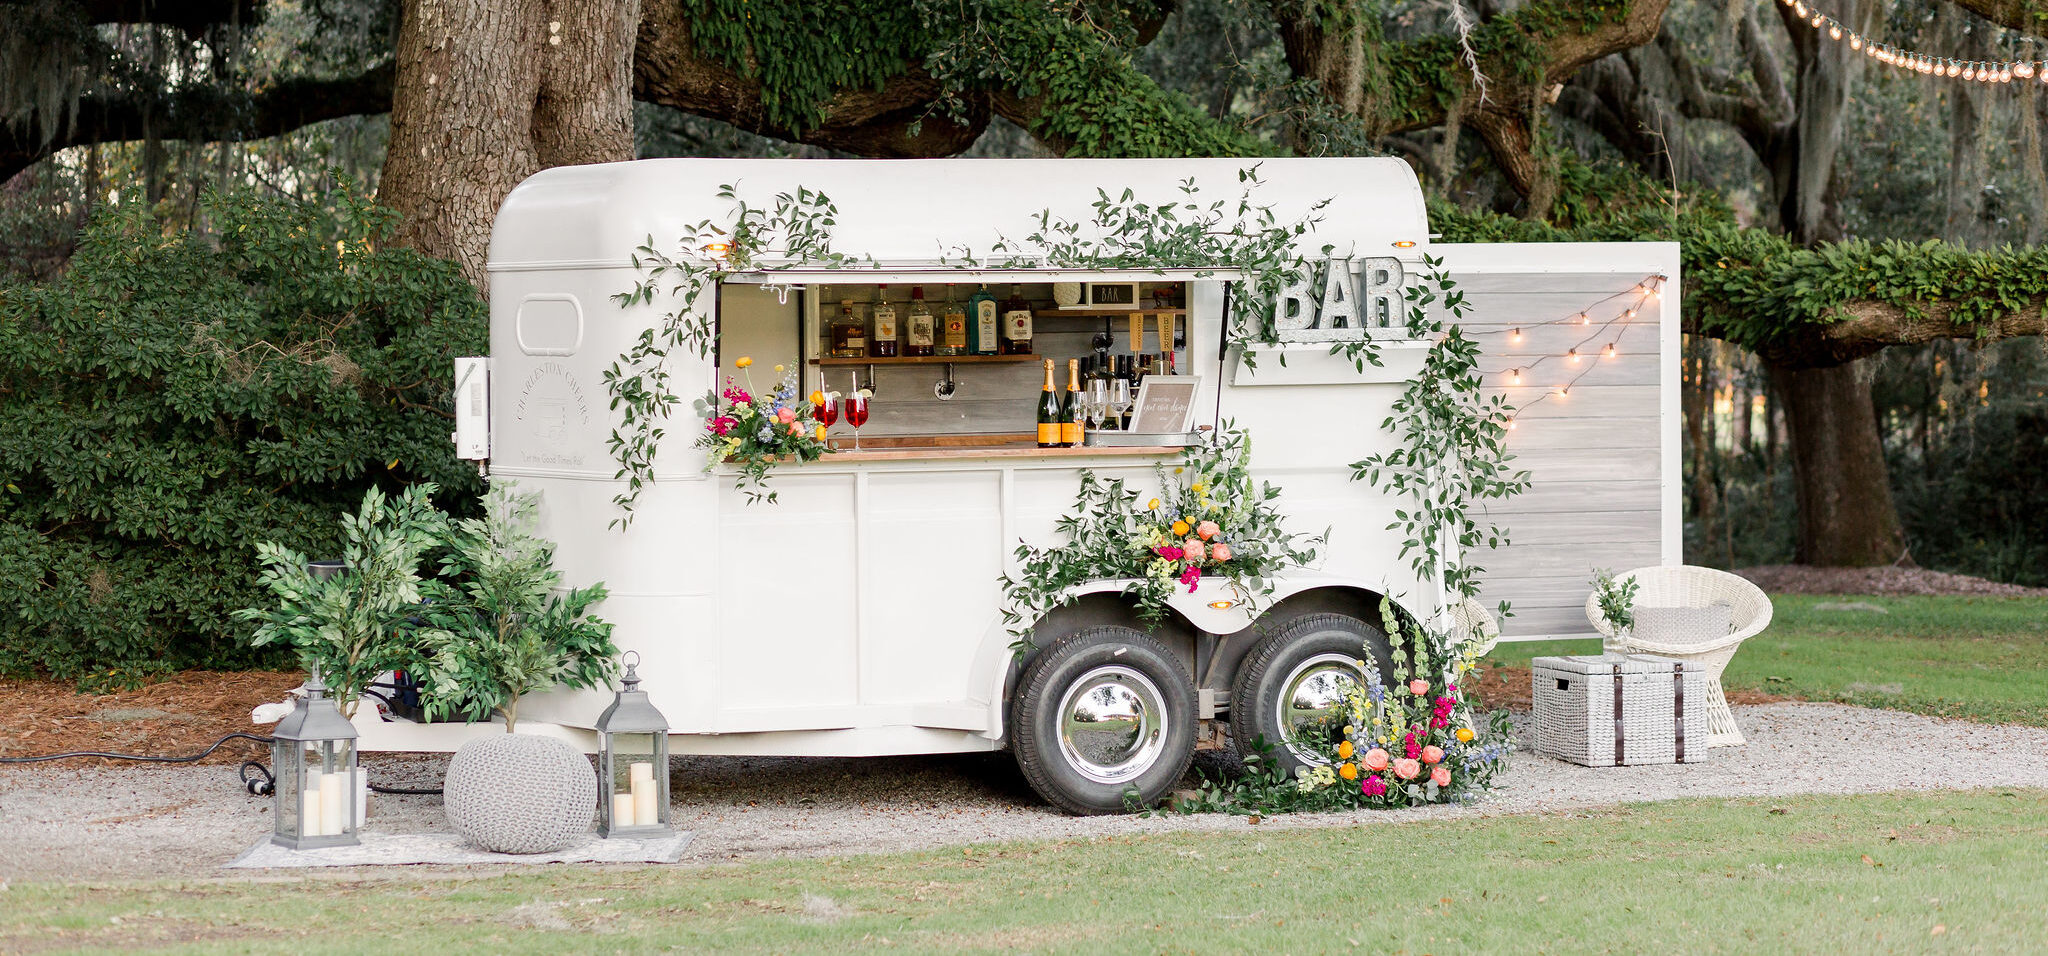 Mobile bar service in Charleston, SC for weddings, corporate events and more